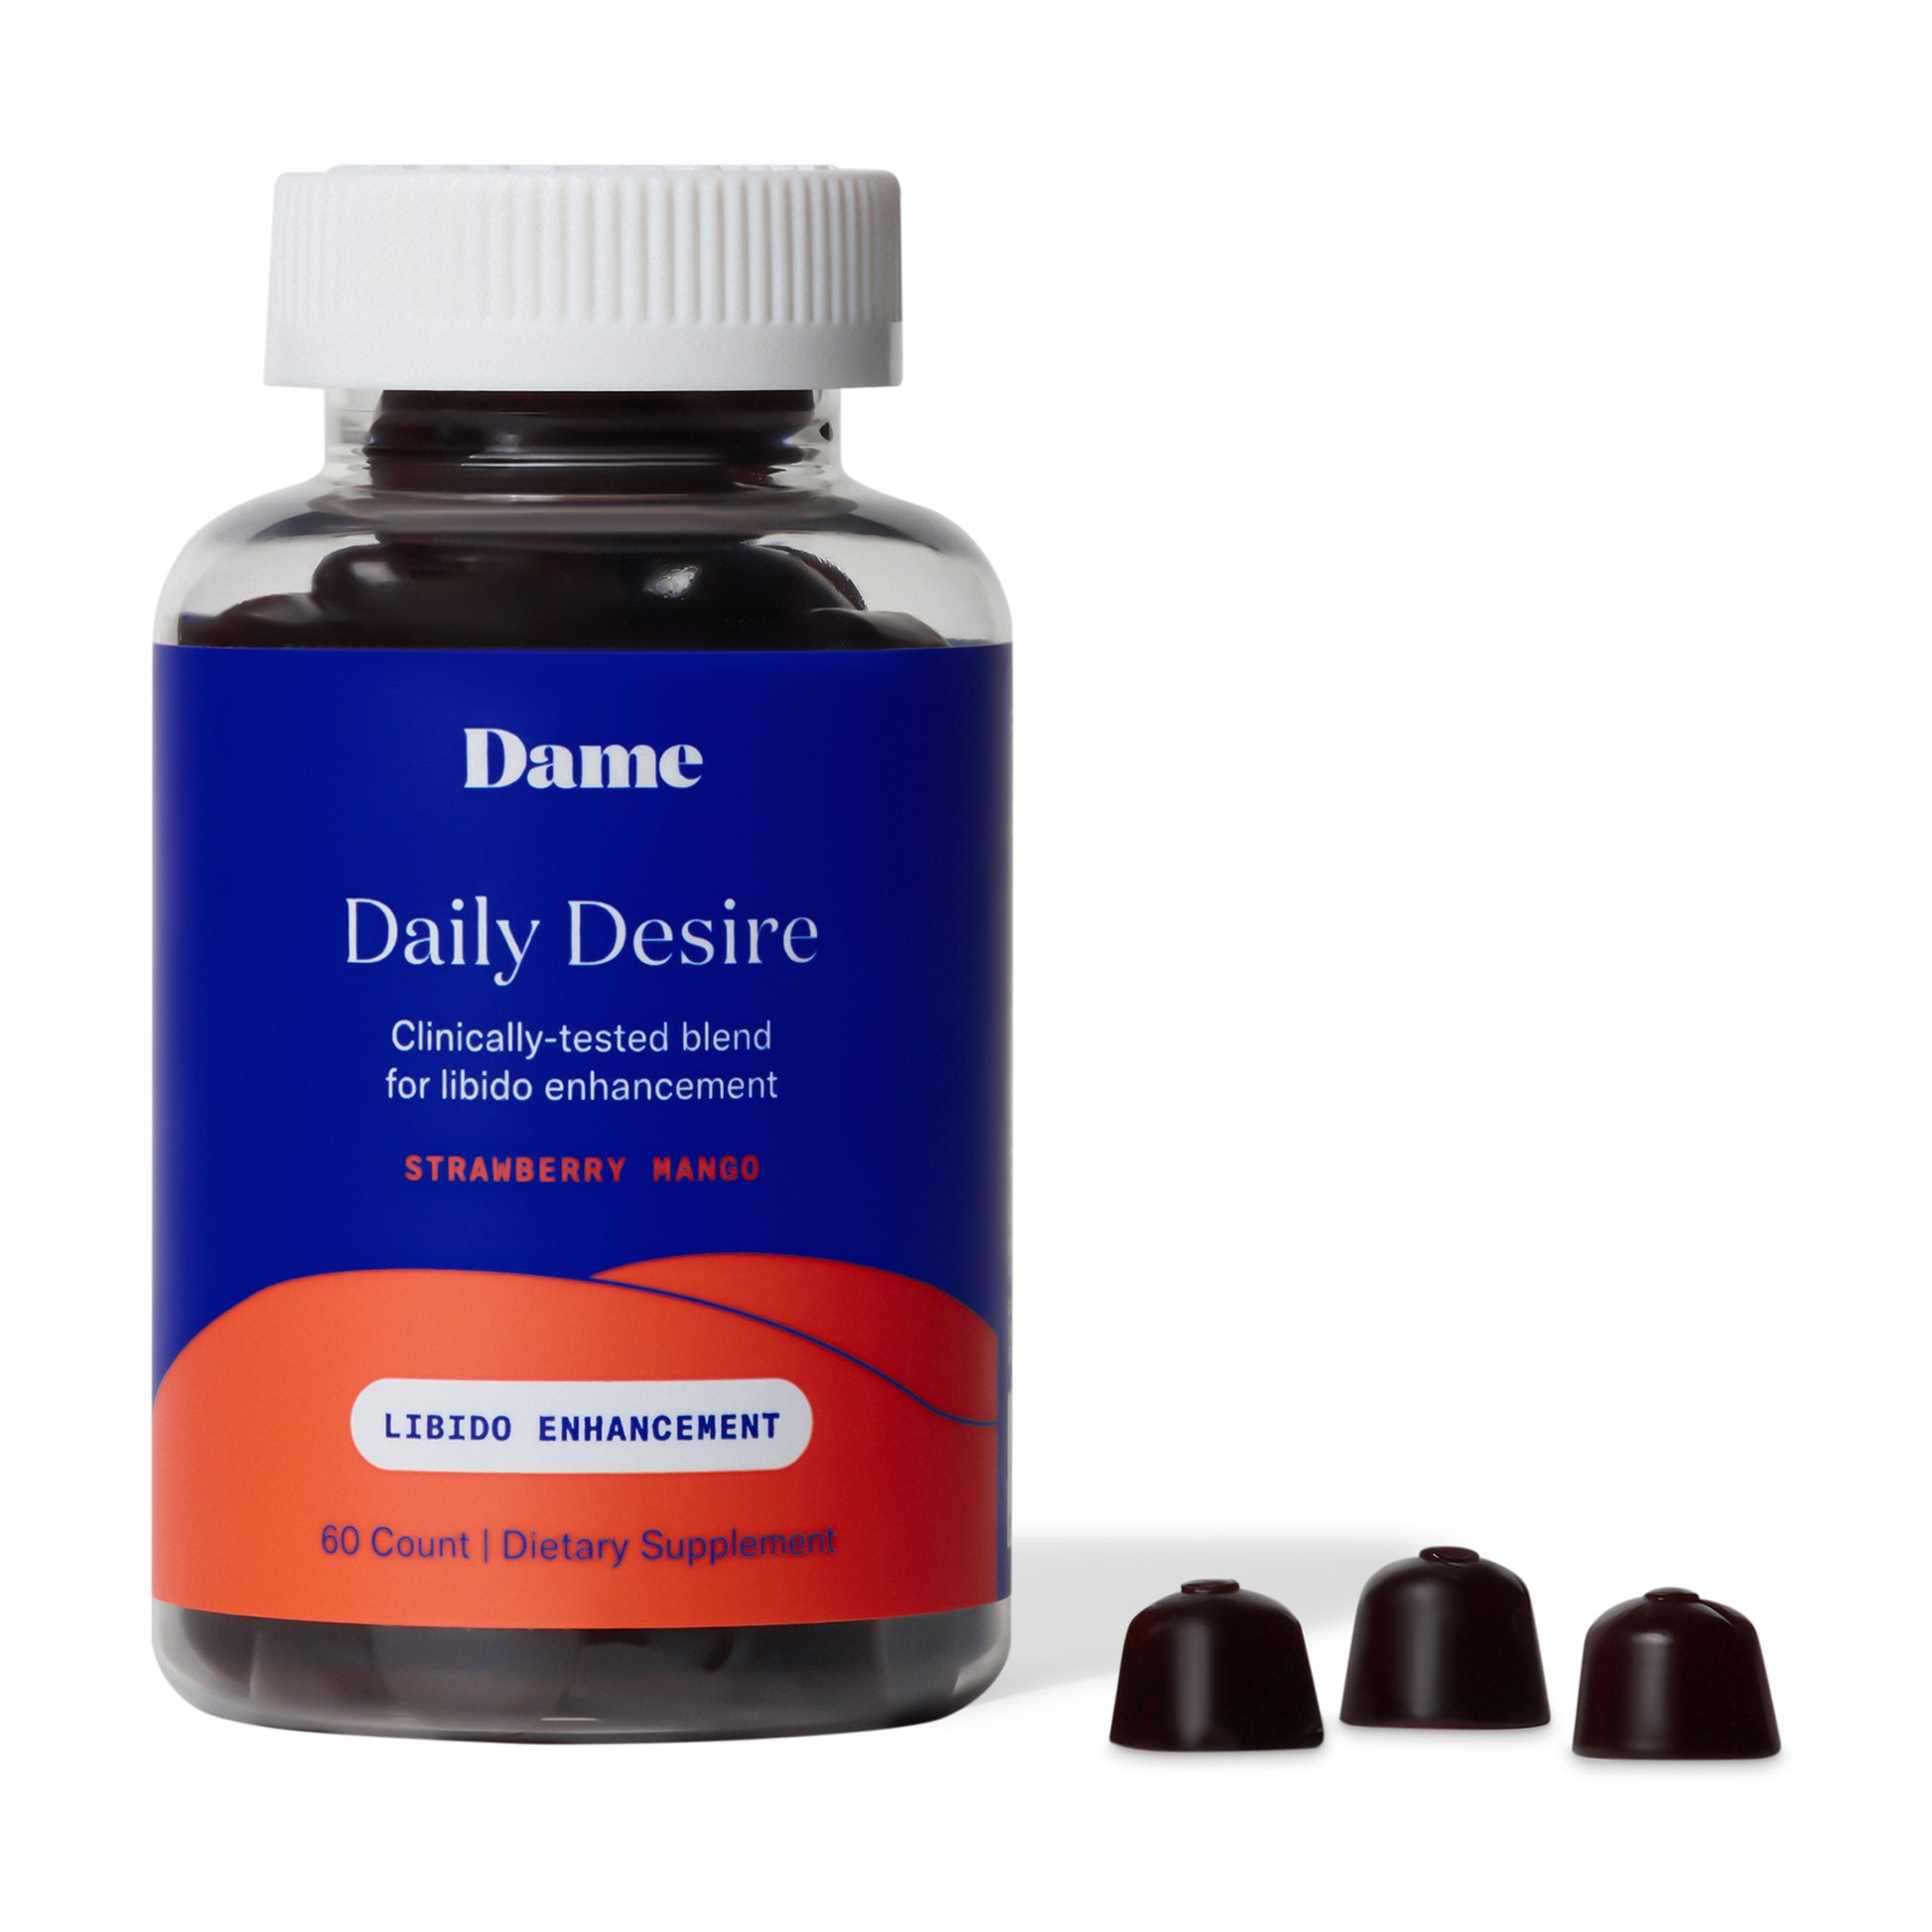 | Seamless | Dame Desire Gummies in bottle and next to bottle